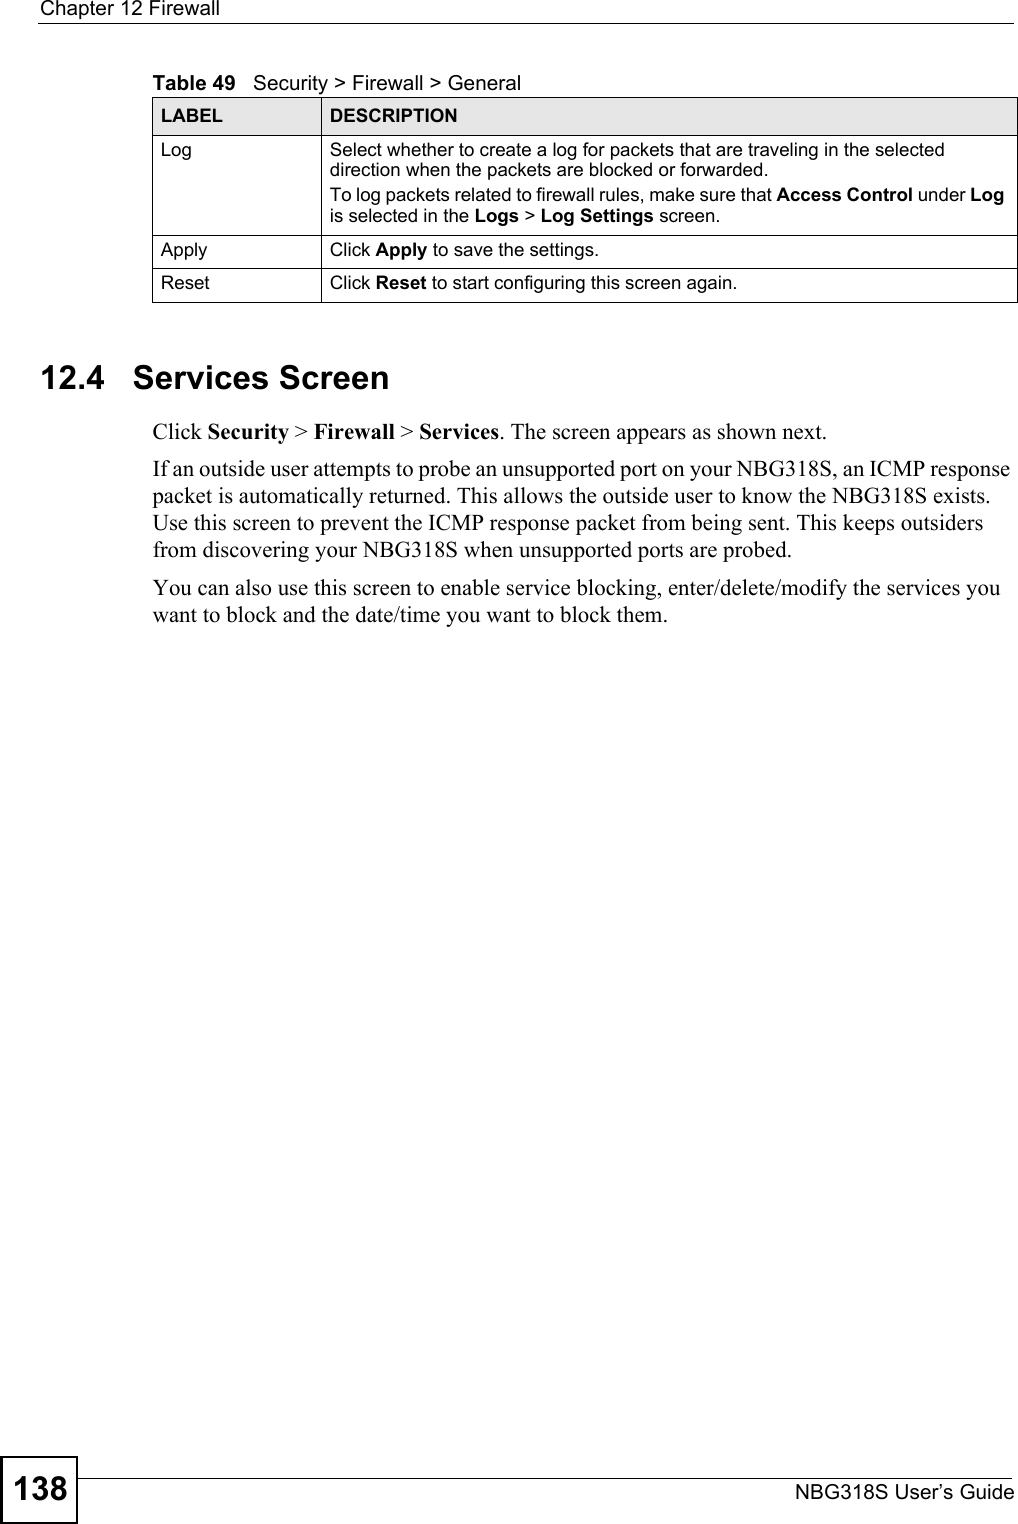 Chapter 12 FirewallNBG318S User’s Guide13812.4   Services ScreenClick Security &gt; Firewall &gt; Services. The screen appears as shown next. If an outside user attempts to probe an unsupported port on your NBG318S, an ICMP response packet is automatically returned. This allows the outside user to know the NBG318S exists. Use this screen to prevent the ICMP response packet from being sent. This keeps outsiders from discovering your NBG318S when unsupported ports are probed.You can also use this screen to enable service blocking, enter/delete/modify the services you want to block and the date/time you want to block them.Log Select whether to create a log for packets that are traveling in the selected direction when the packets are blocked or forwarded.To log packets related to firewall rules, make sure that Access Control under Log is selected in the Logs &gt; Log Settings screen. Apply Click Apply to save the settings. Reset Click Reset to start configuring this screen again. Table 49   Security &gt; Firewall &gt; General LABEL DESCRIPTION